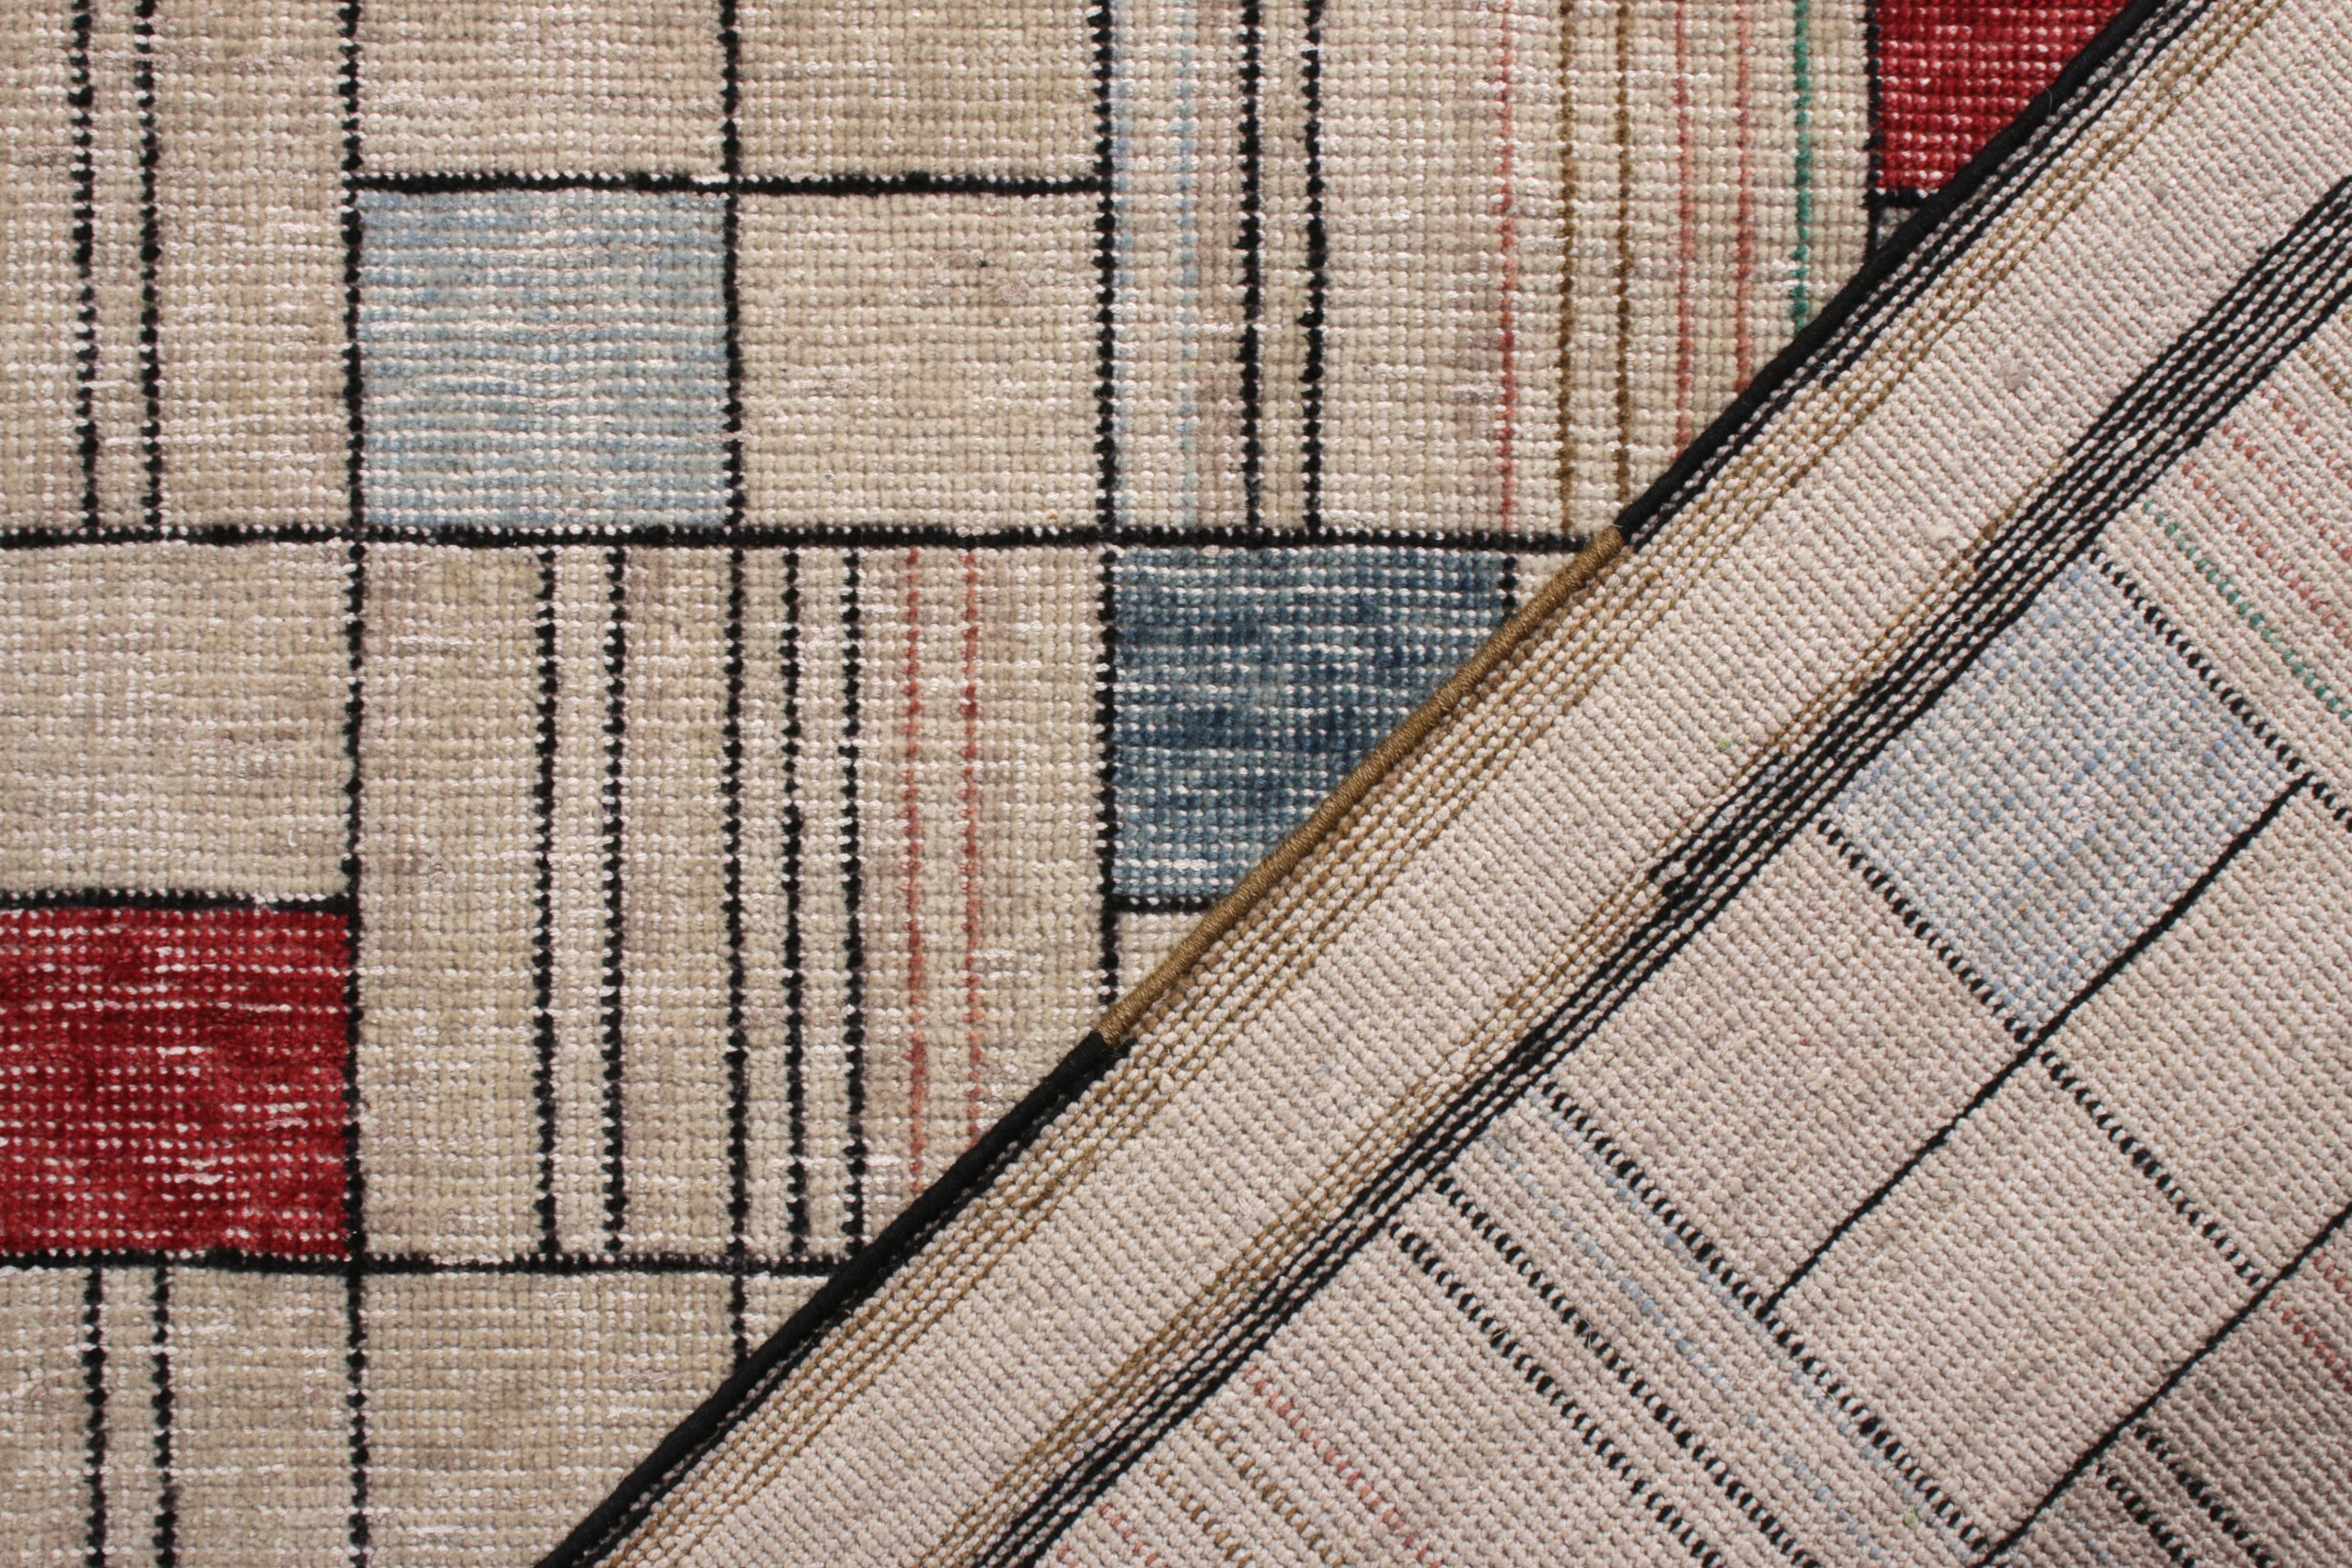 Hand-Knotted Rug & Kilim’s Modern Rug, Distressed Style, Beige Multi-Color Geometric Pattern